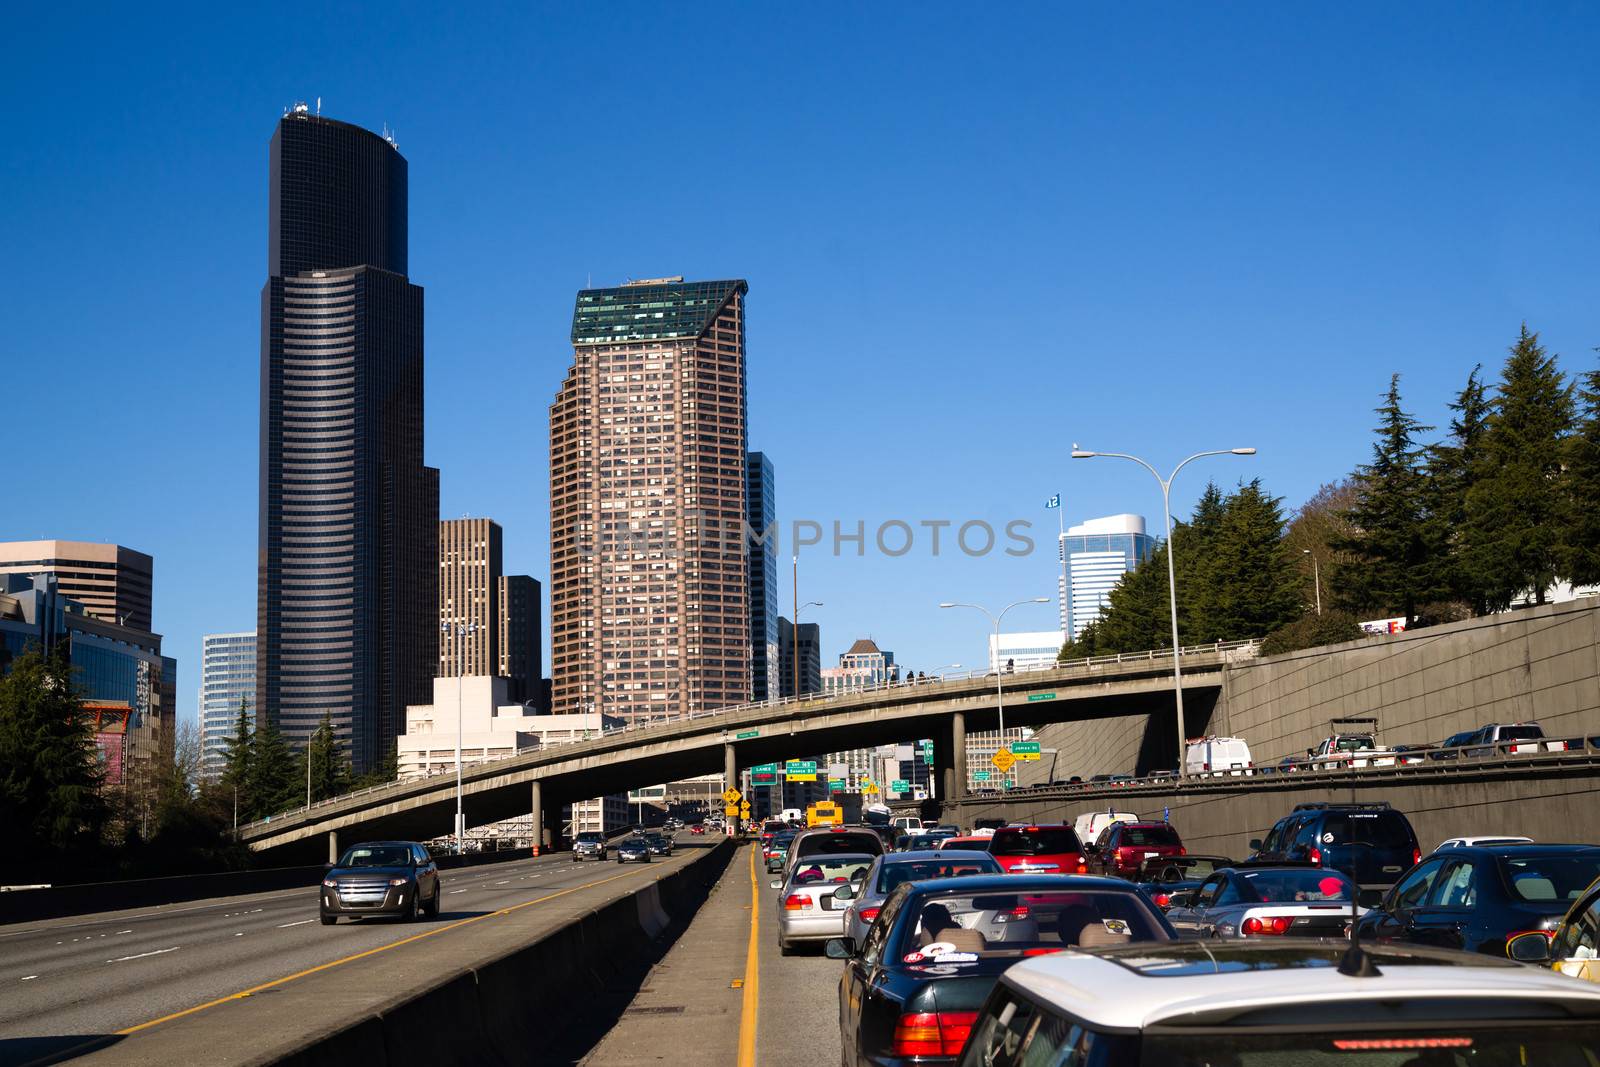 Interstate 5 Highway Cuts Downtown Seattle Skyline During Rush Hour by ChrisBoswell